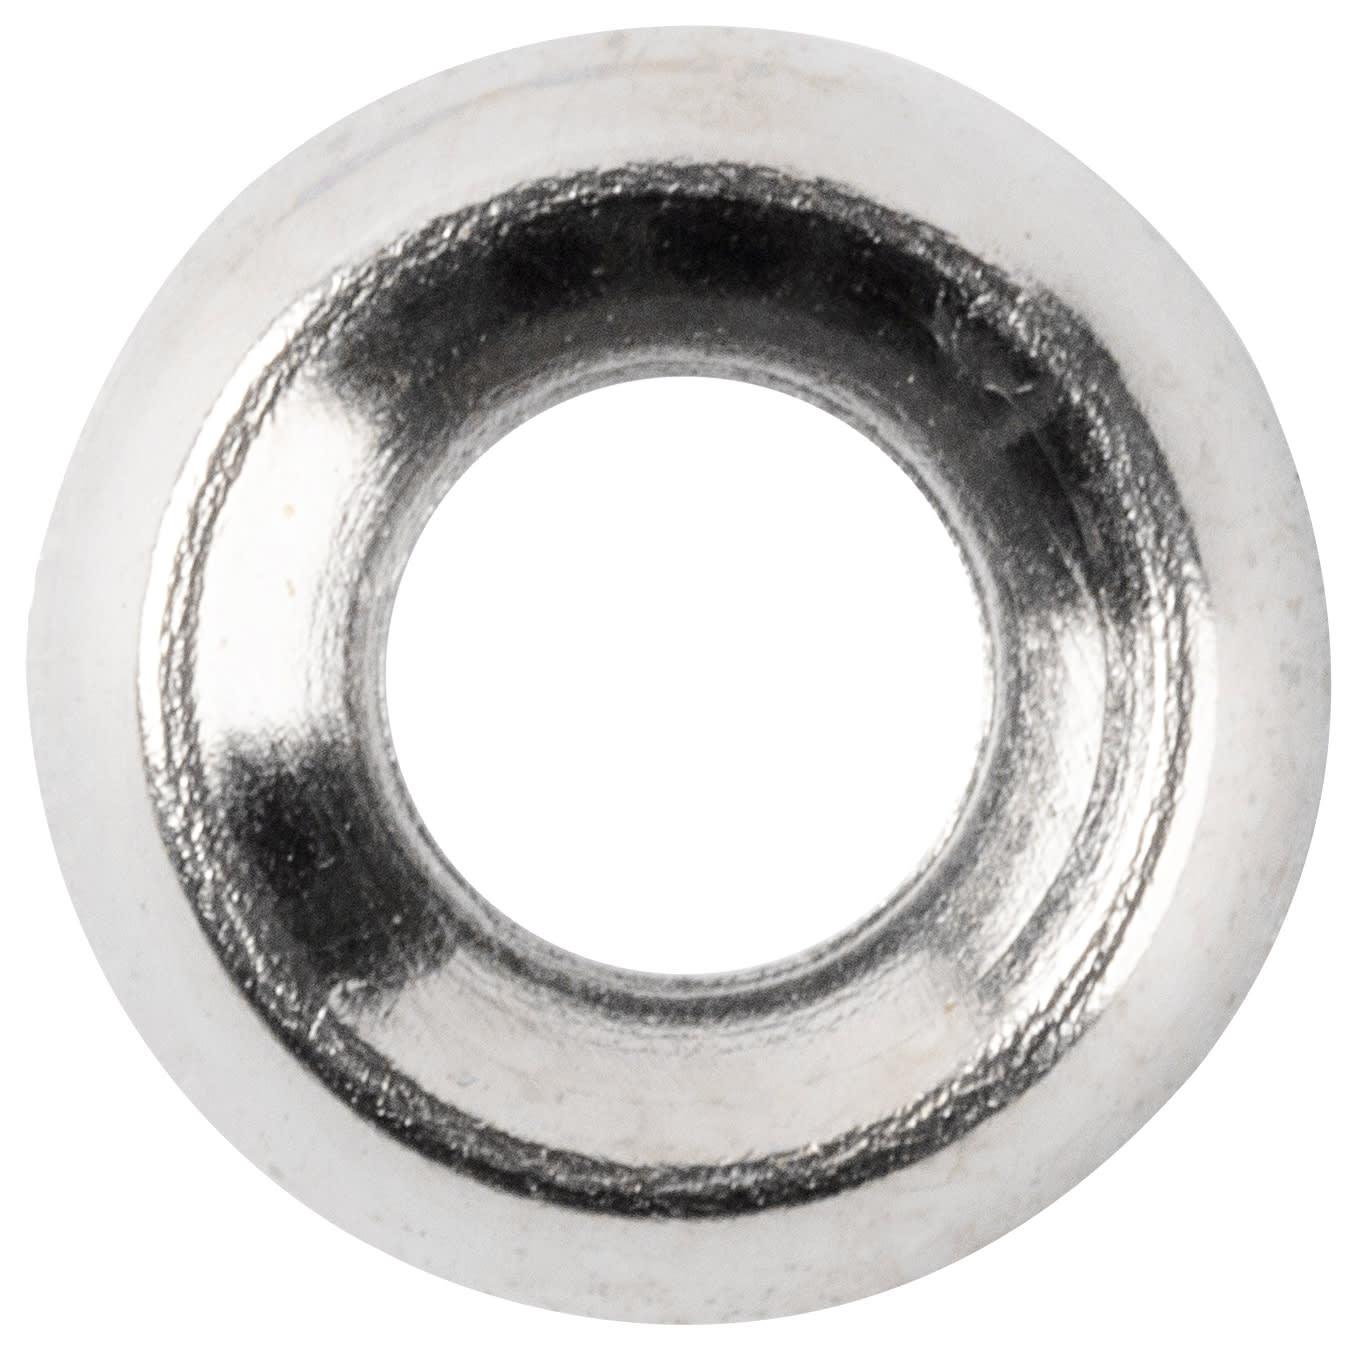 Wickes Nickel Plated Screw Cup Washers - 4mm